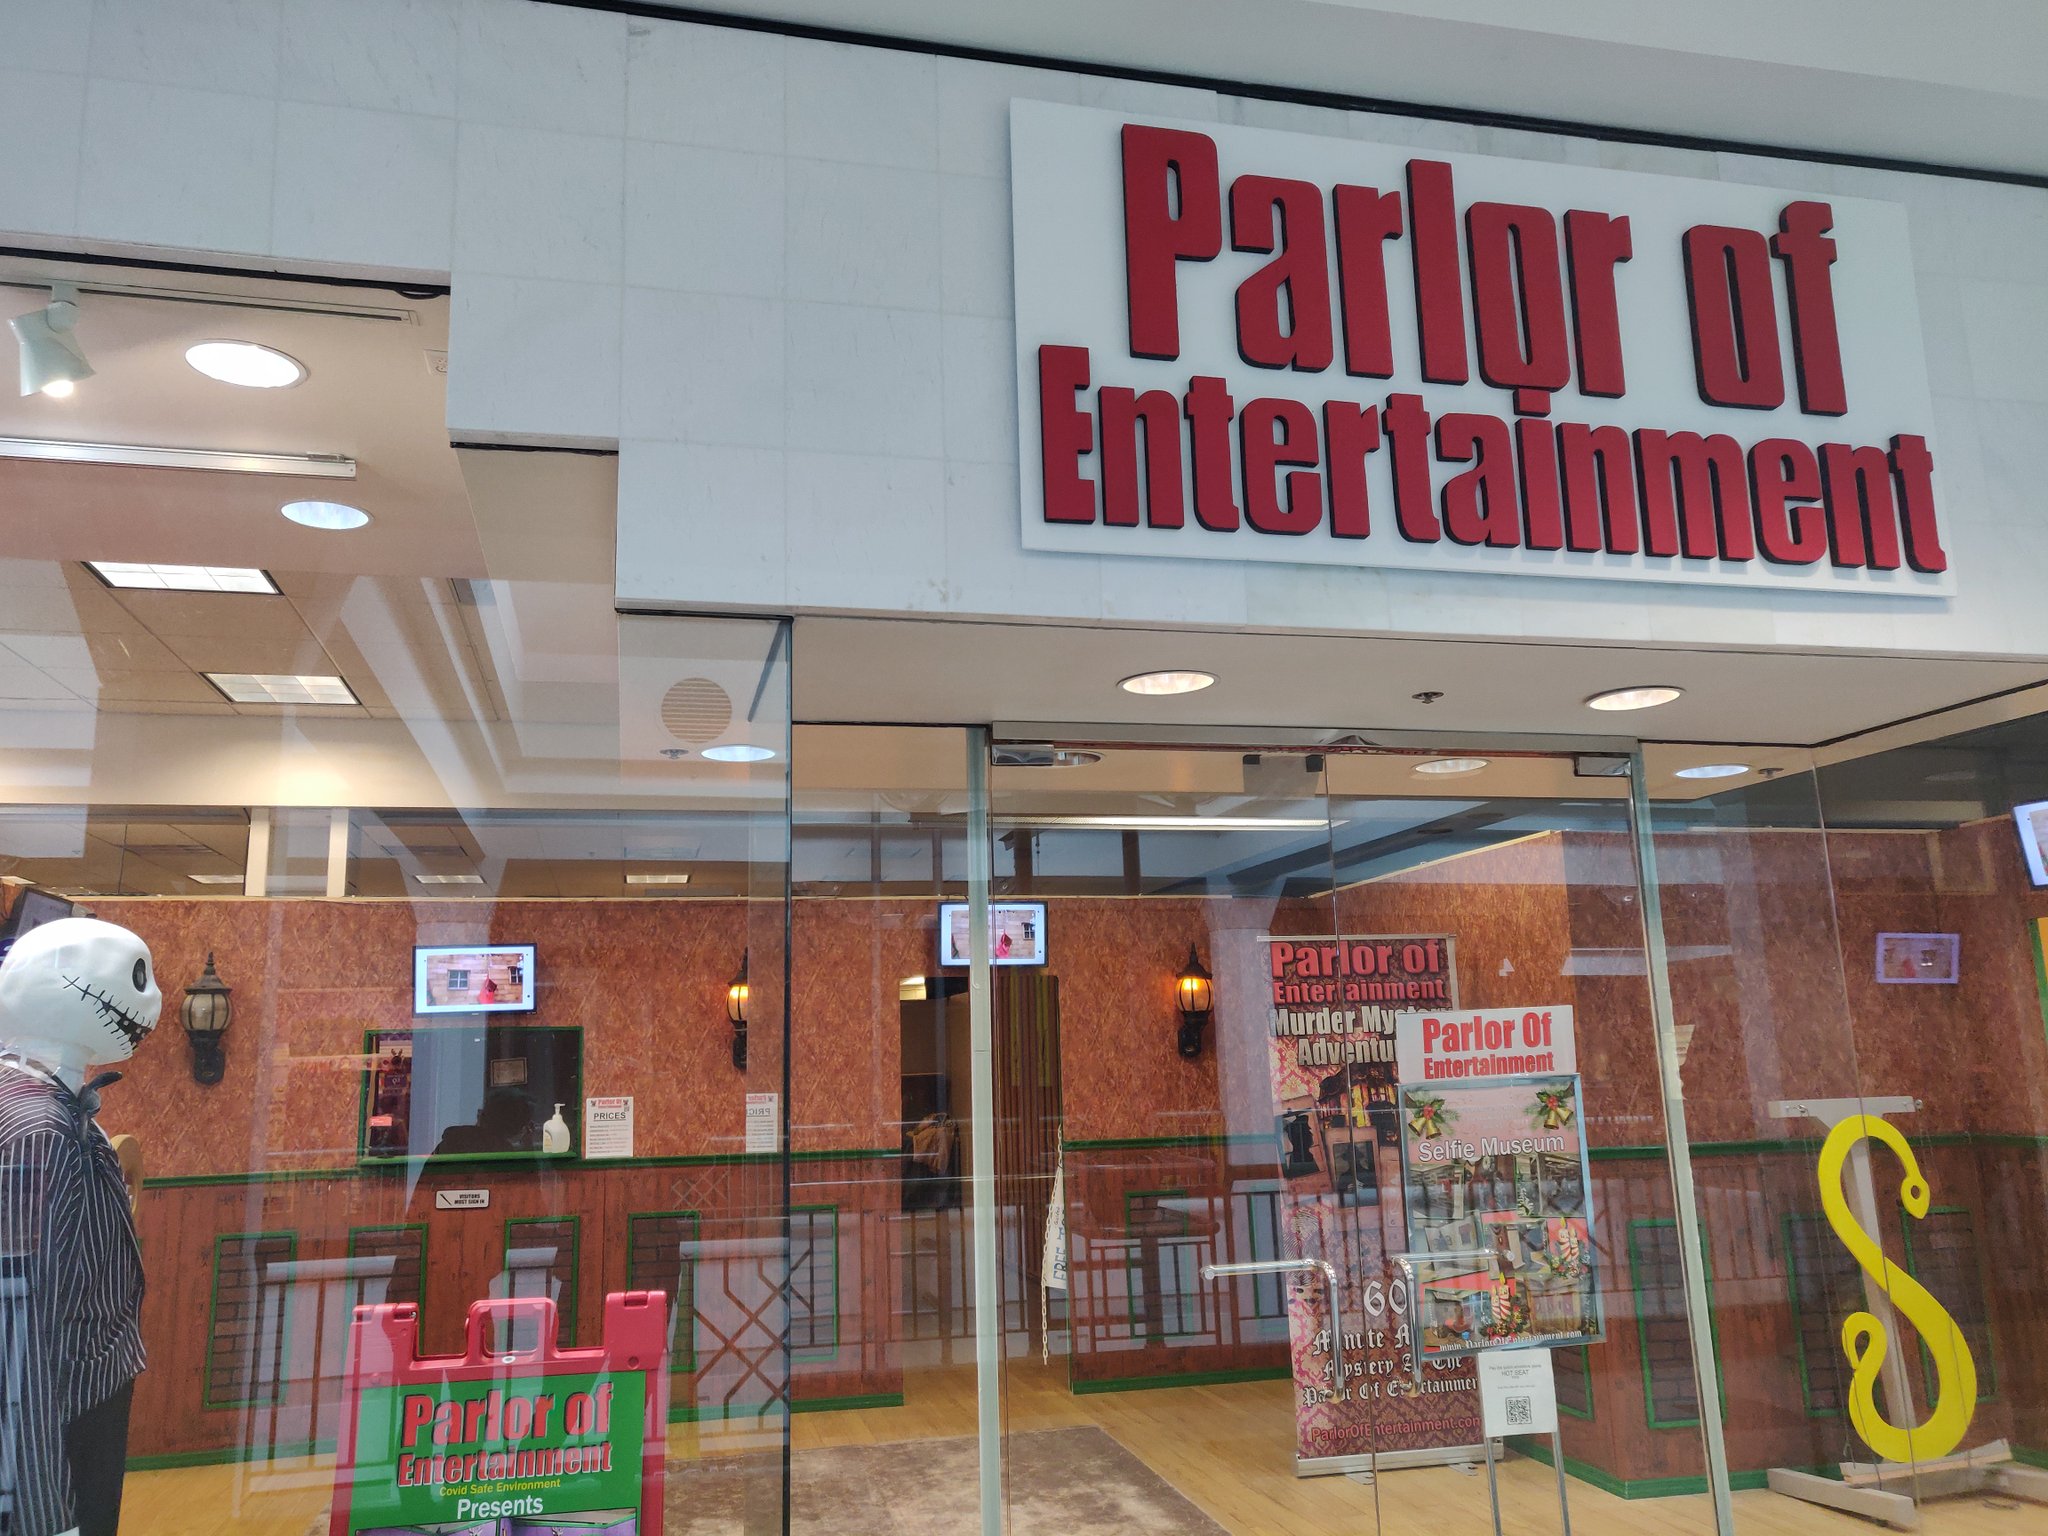 The Parlor of Entertainment